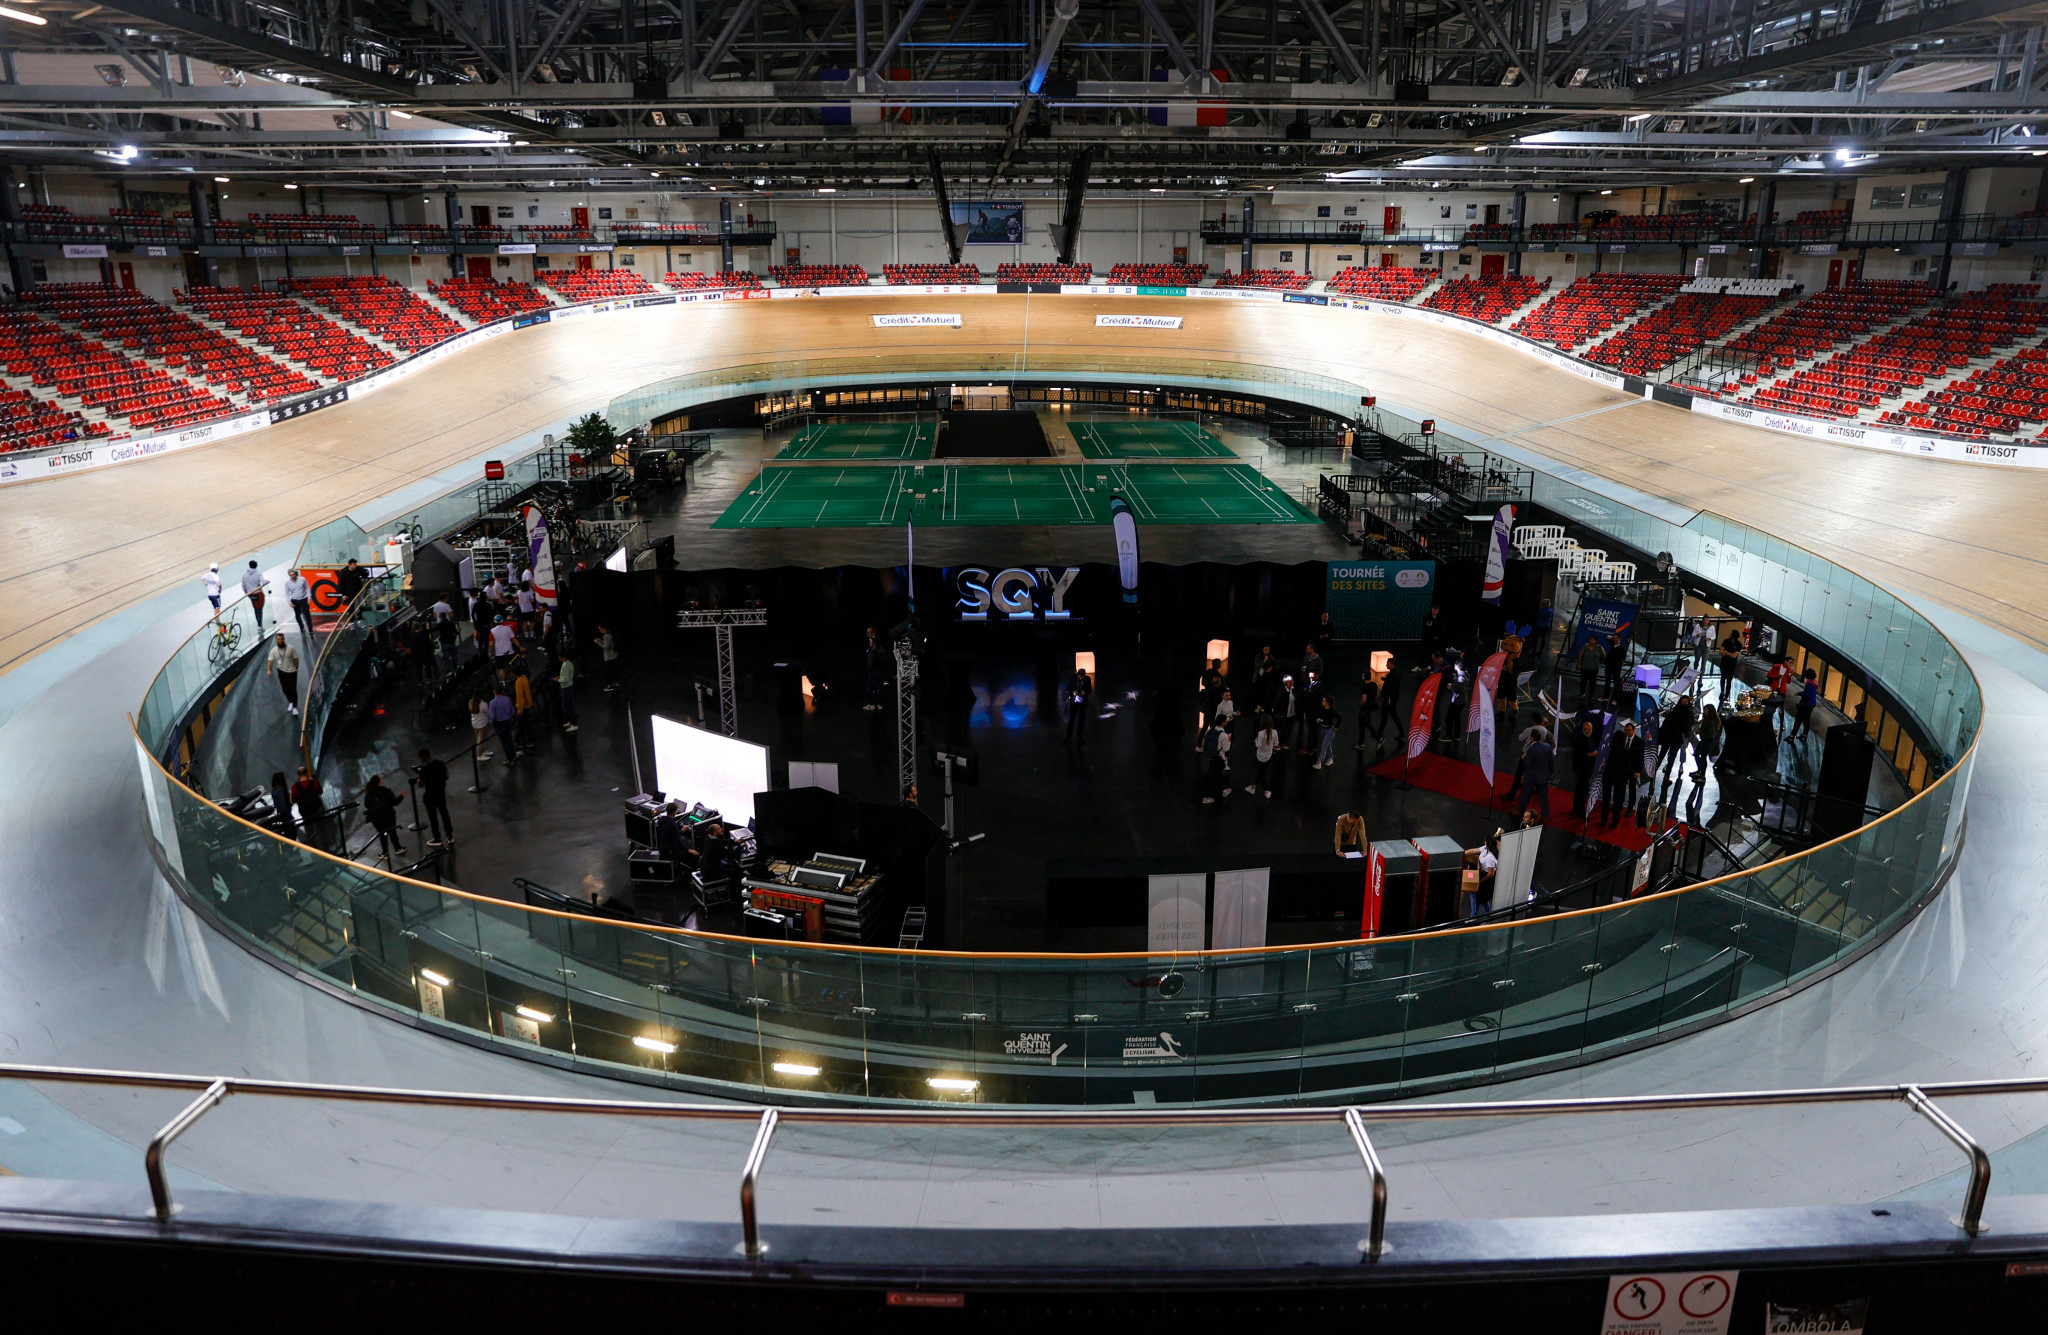 Paris 2024 velodrome ready to host UCI Track Cycling World Championships